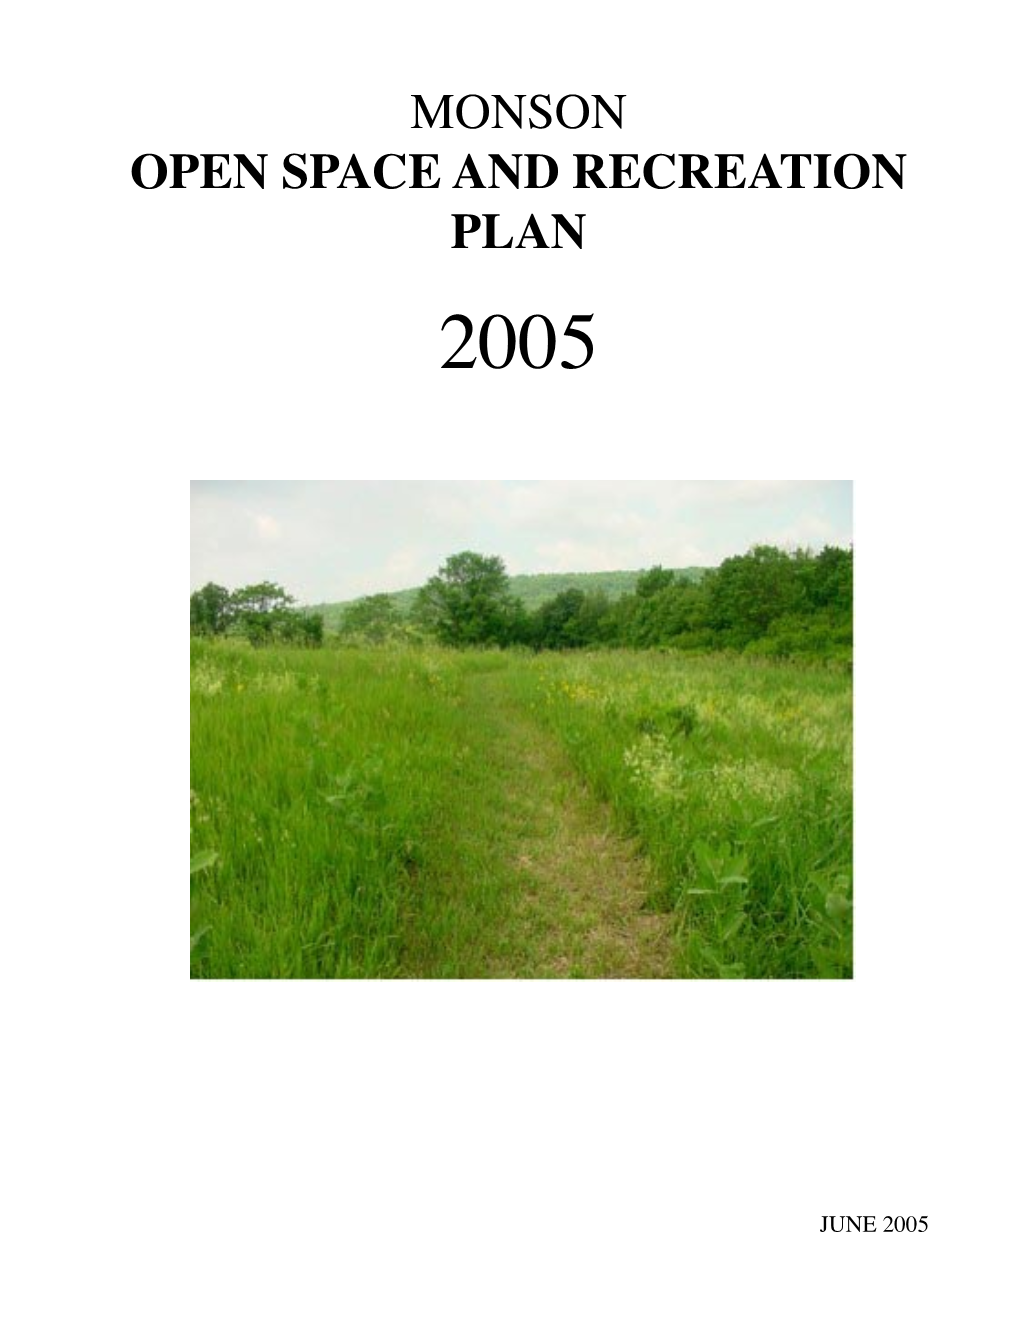 Monson Open Space and Recreation Plan 2005